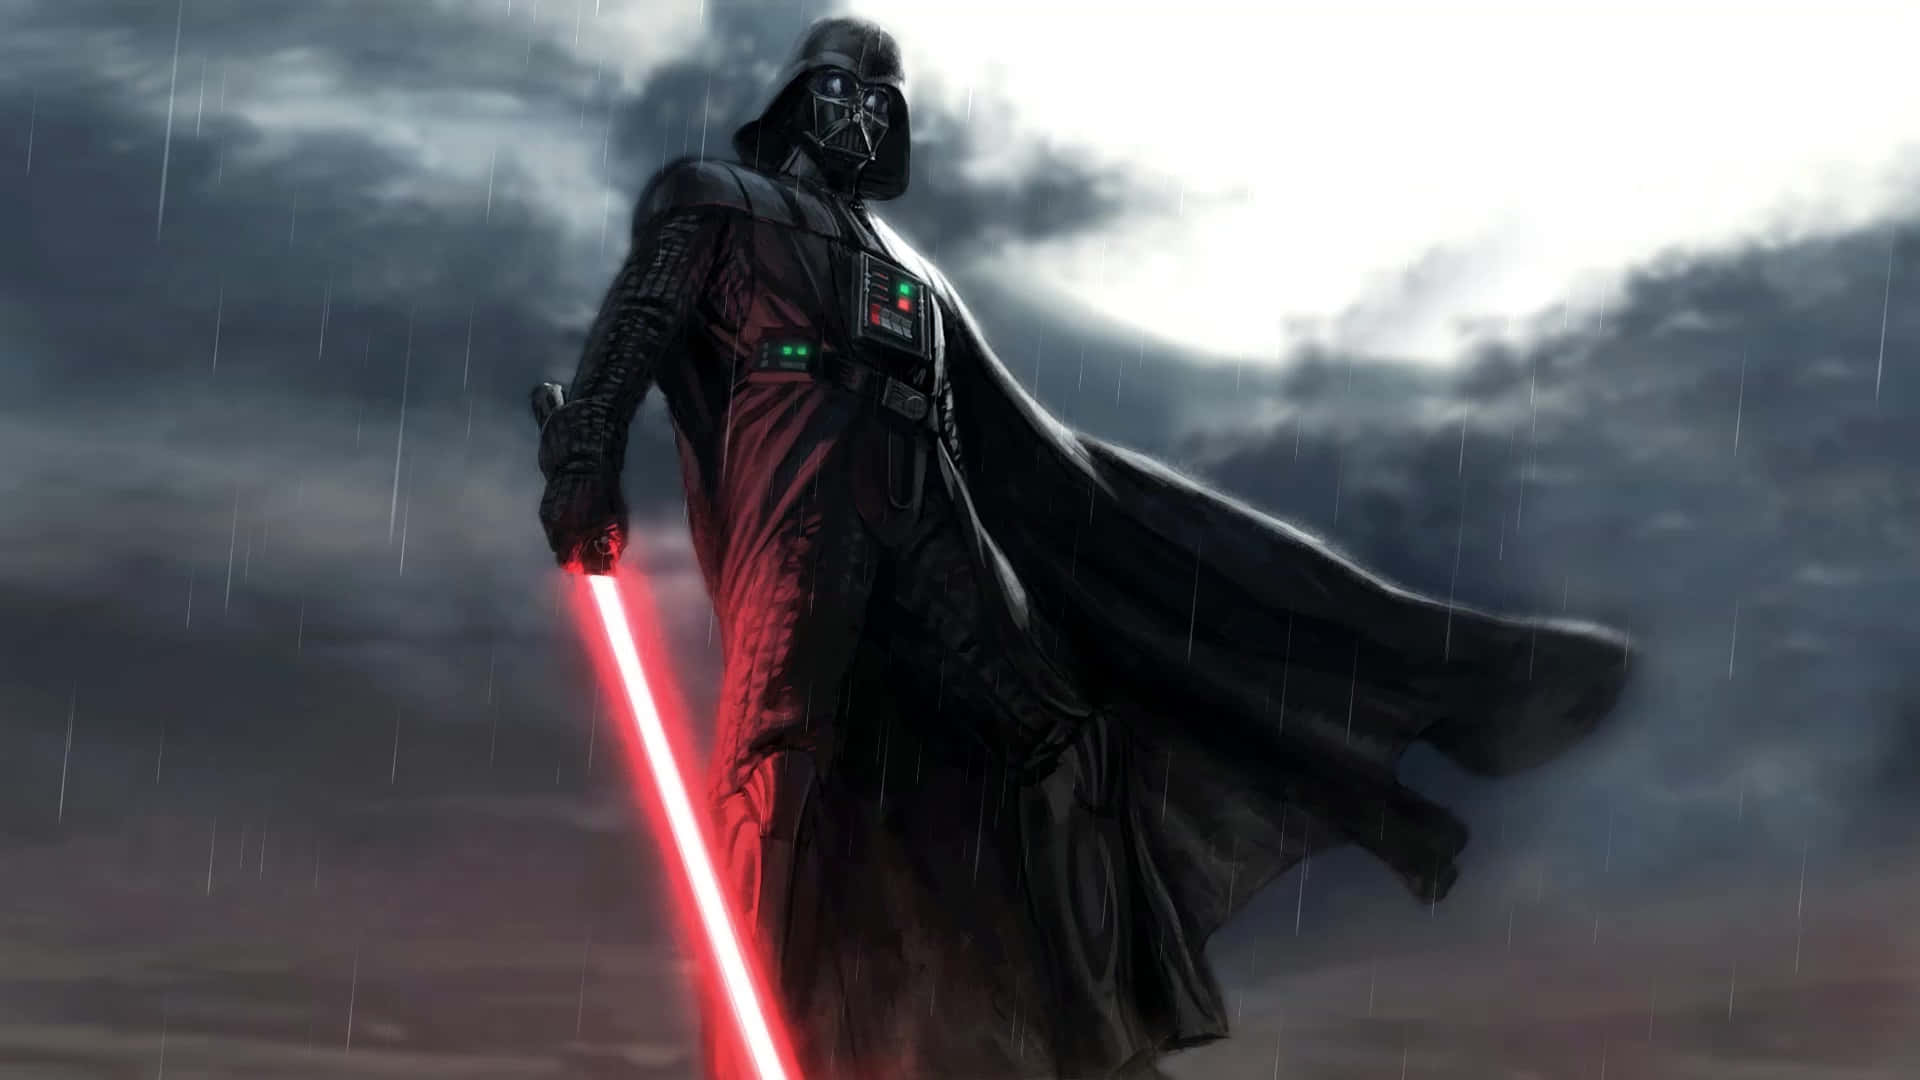 Darth Vader, The Dark Lord Of The Sith